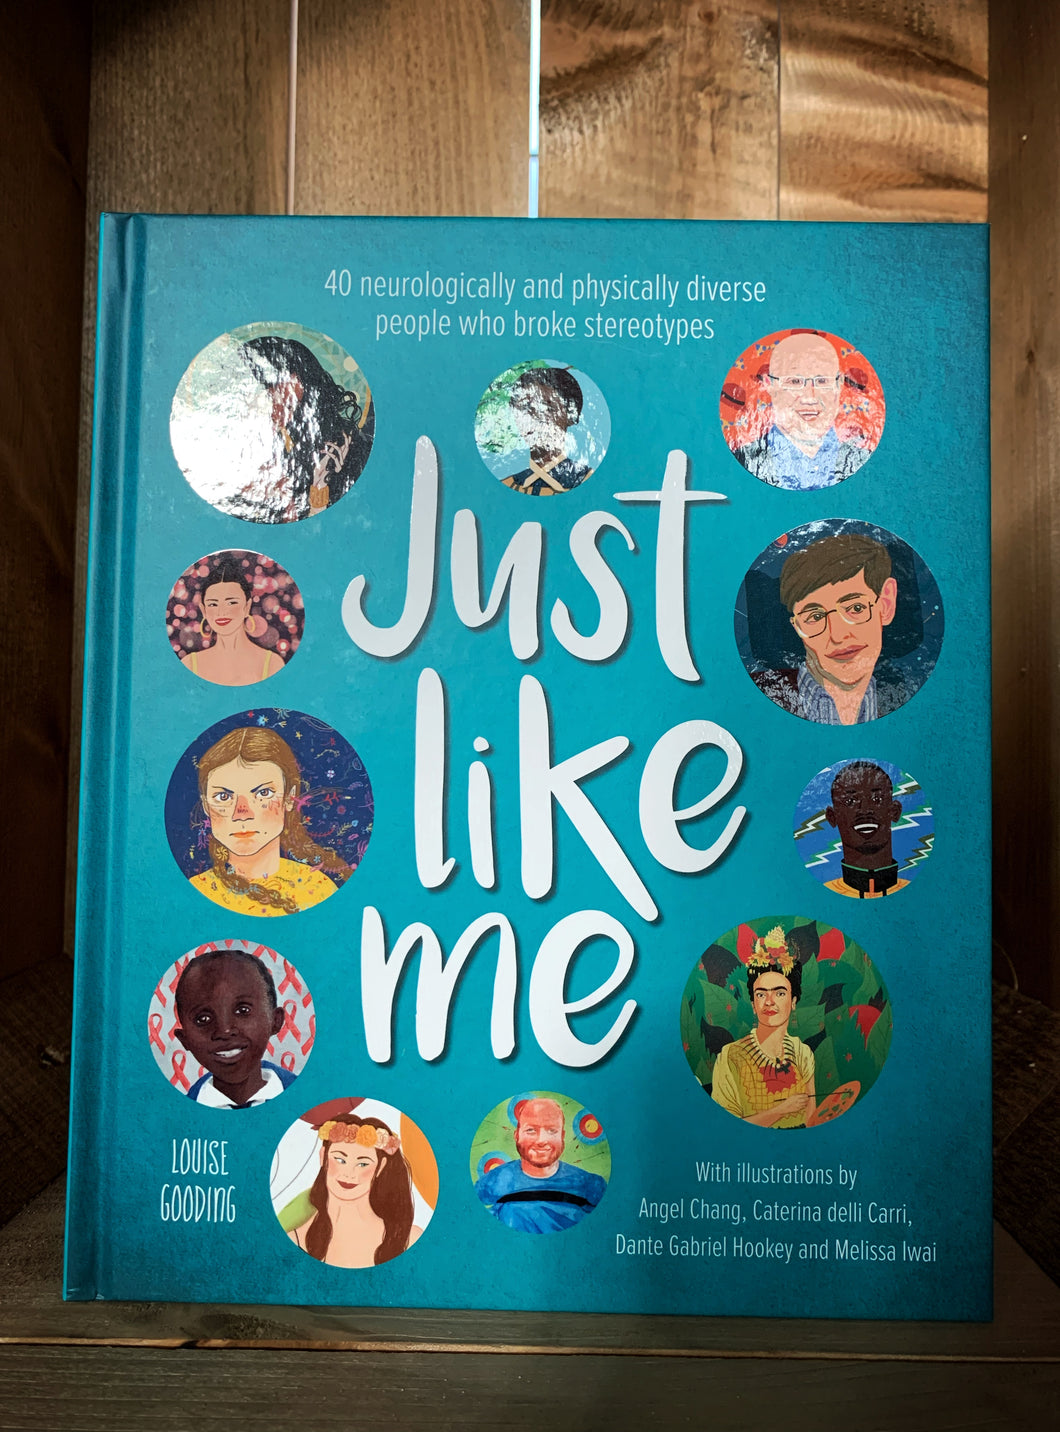 Image of the front cover of the hardback book Just Like Me. The cover has 11 round illustrated portraits of people featured within the book, set on a dark teal background.